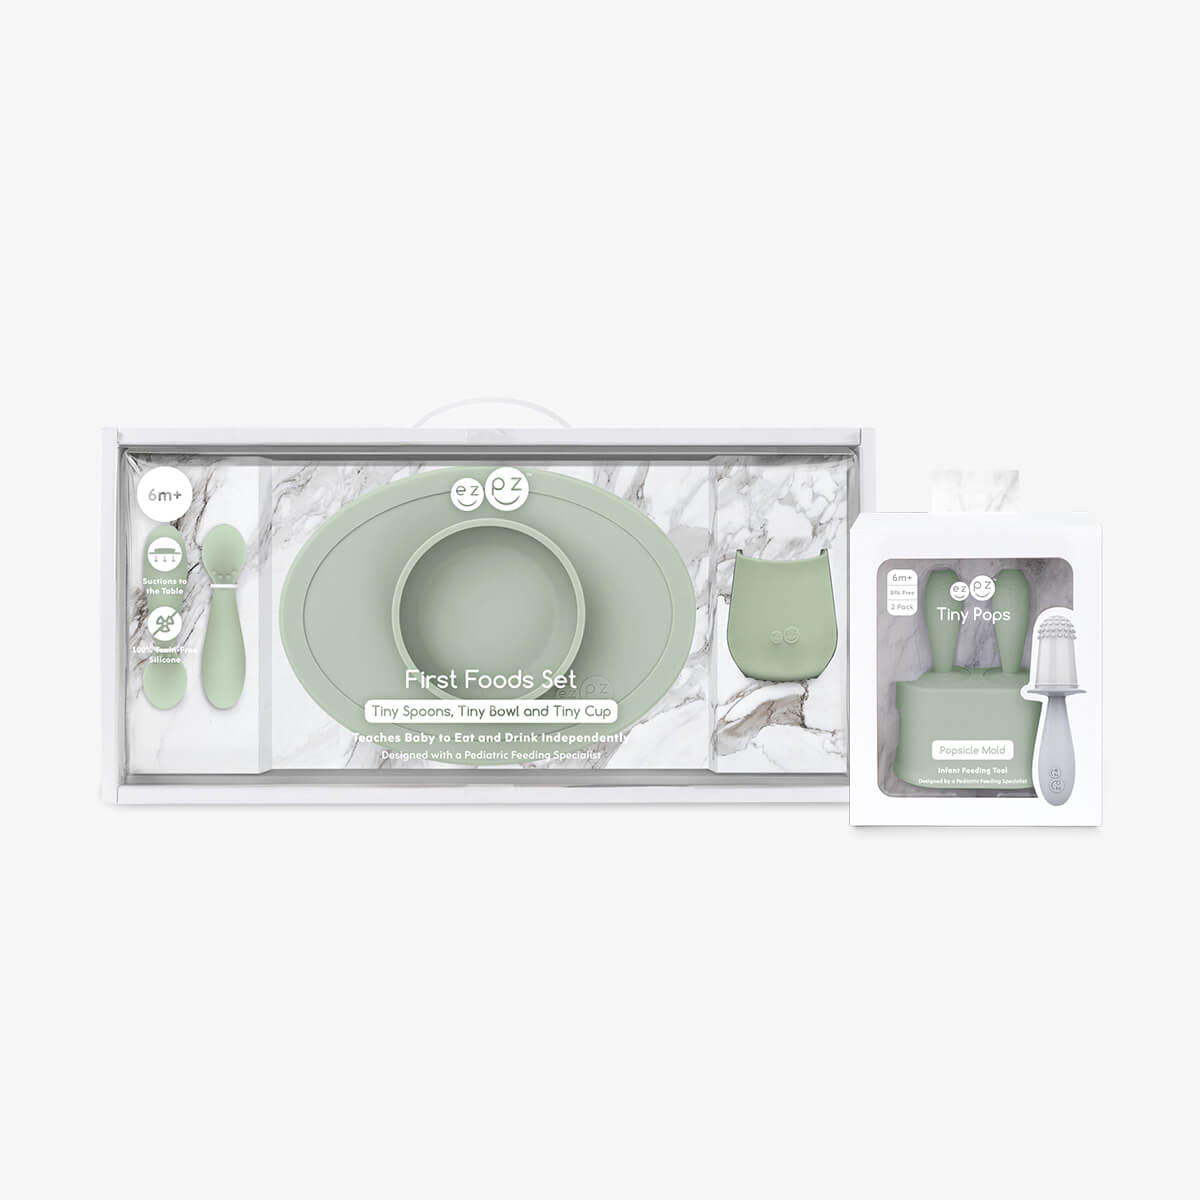 First Bites & Cool Treats Bundle in Sage Green / ezpz First Foods Set and Tiny Pops